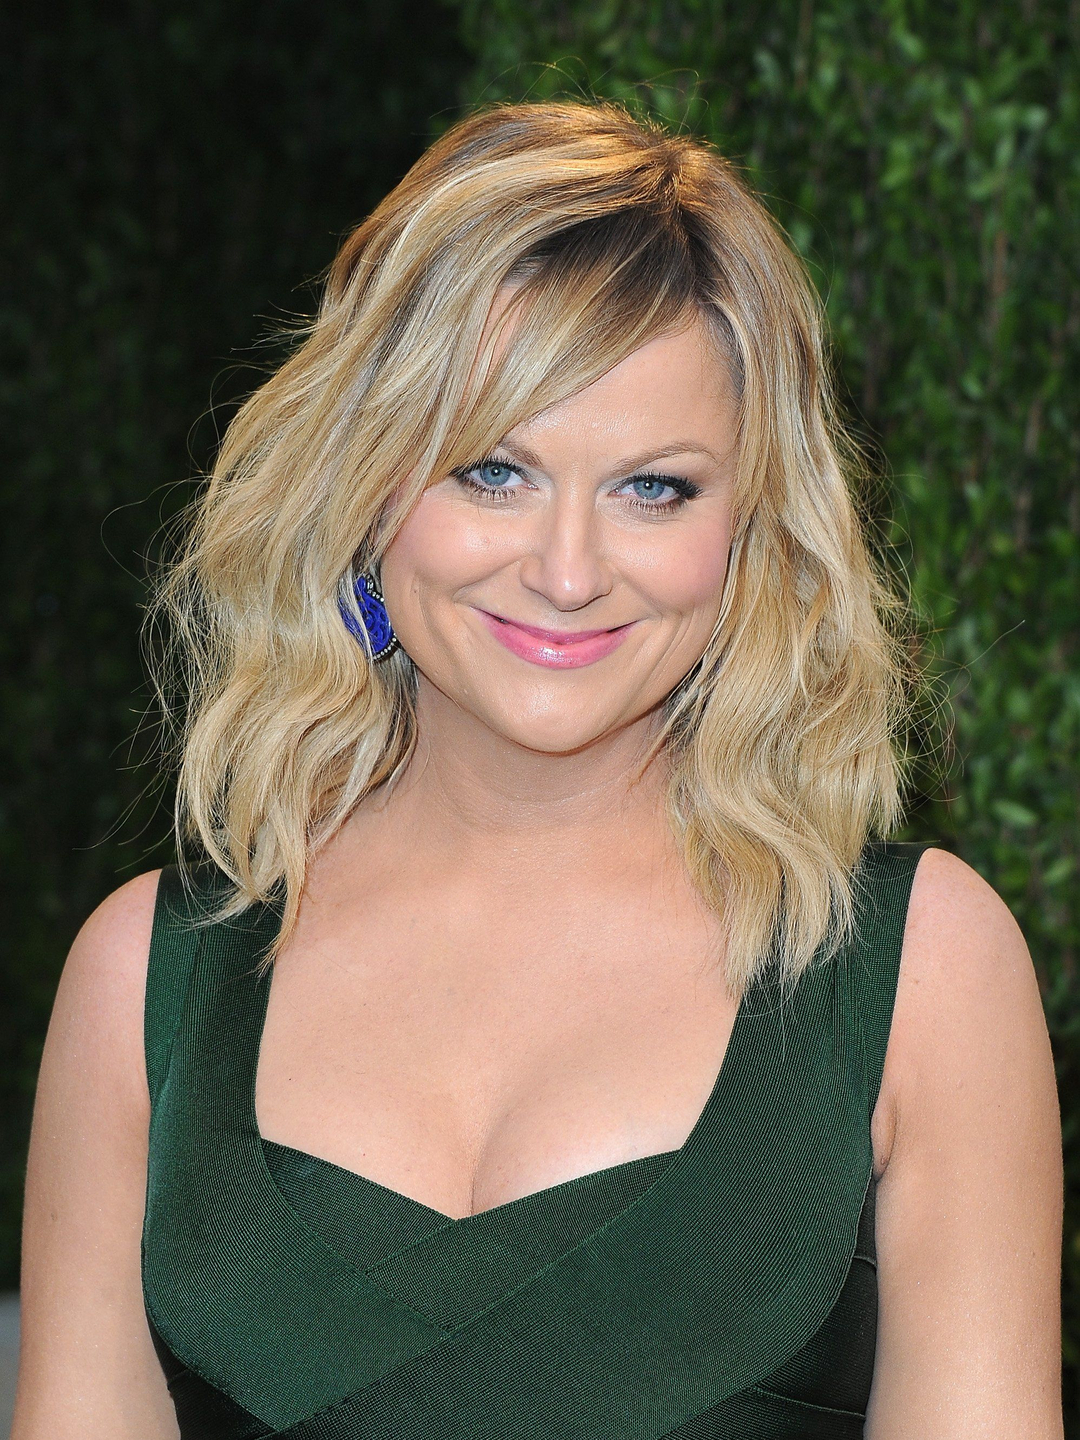 Amy Poehler in her youth